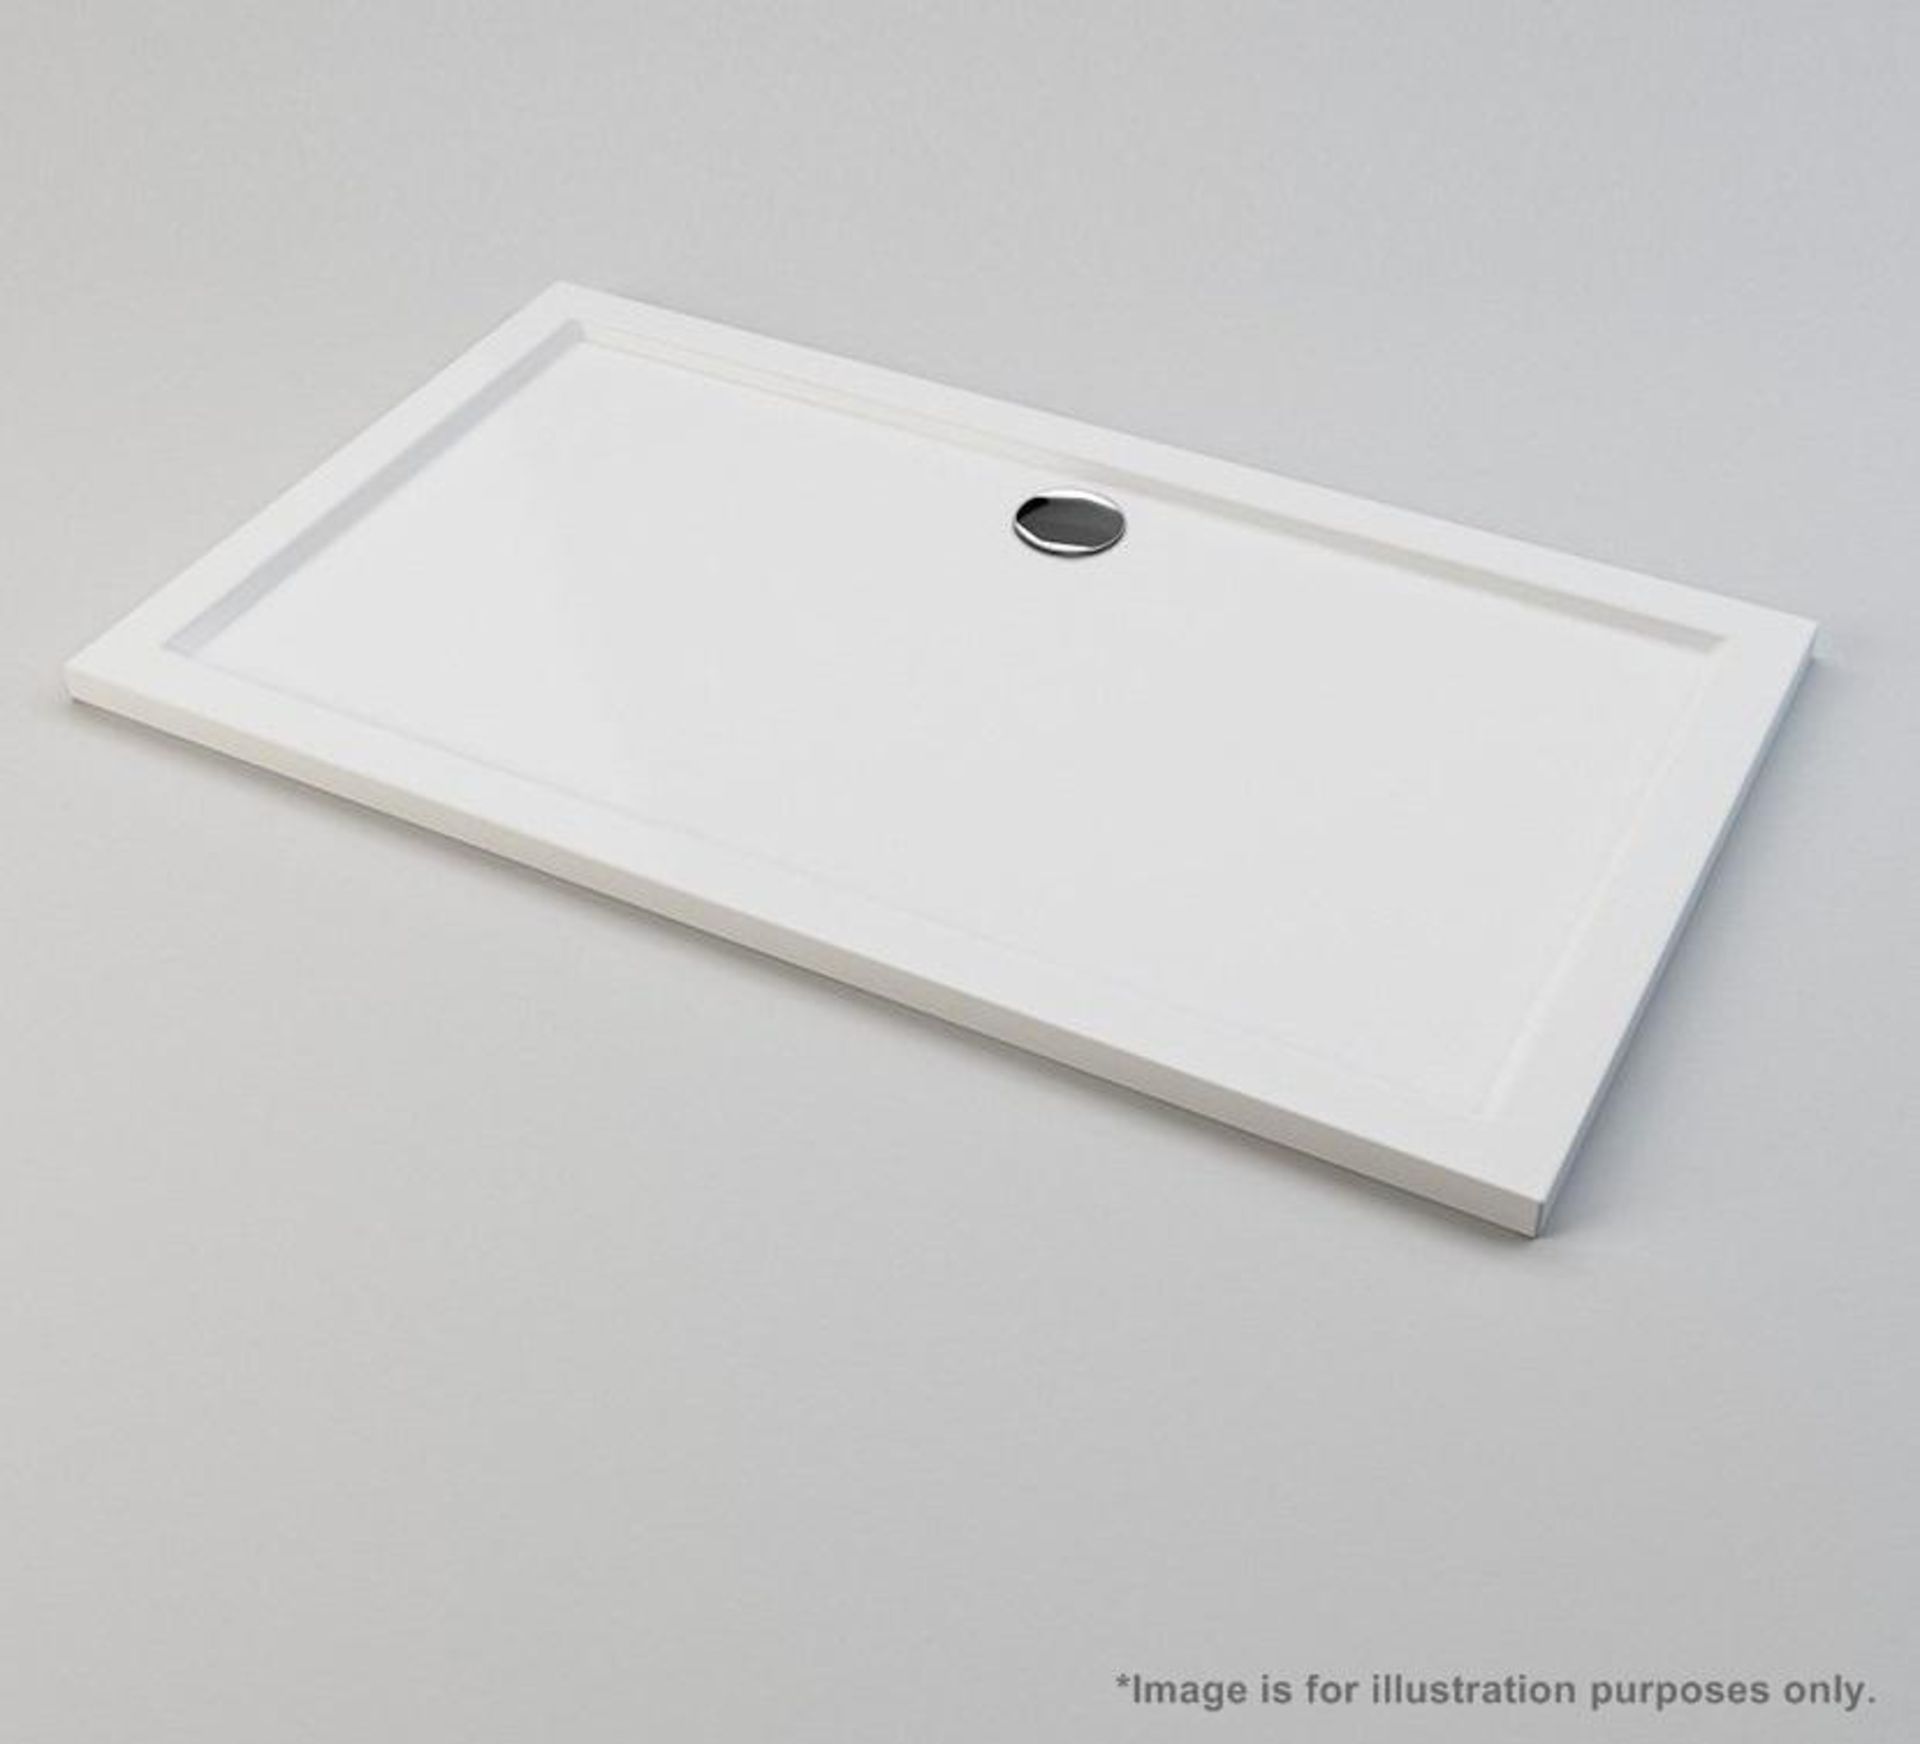 1 x Premier Pearlstone Rectangular Shower Tray 1700mm x 900mm Acrylic - New / Unused Stock - CL269 - - Image 3 of 4